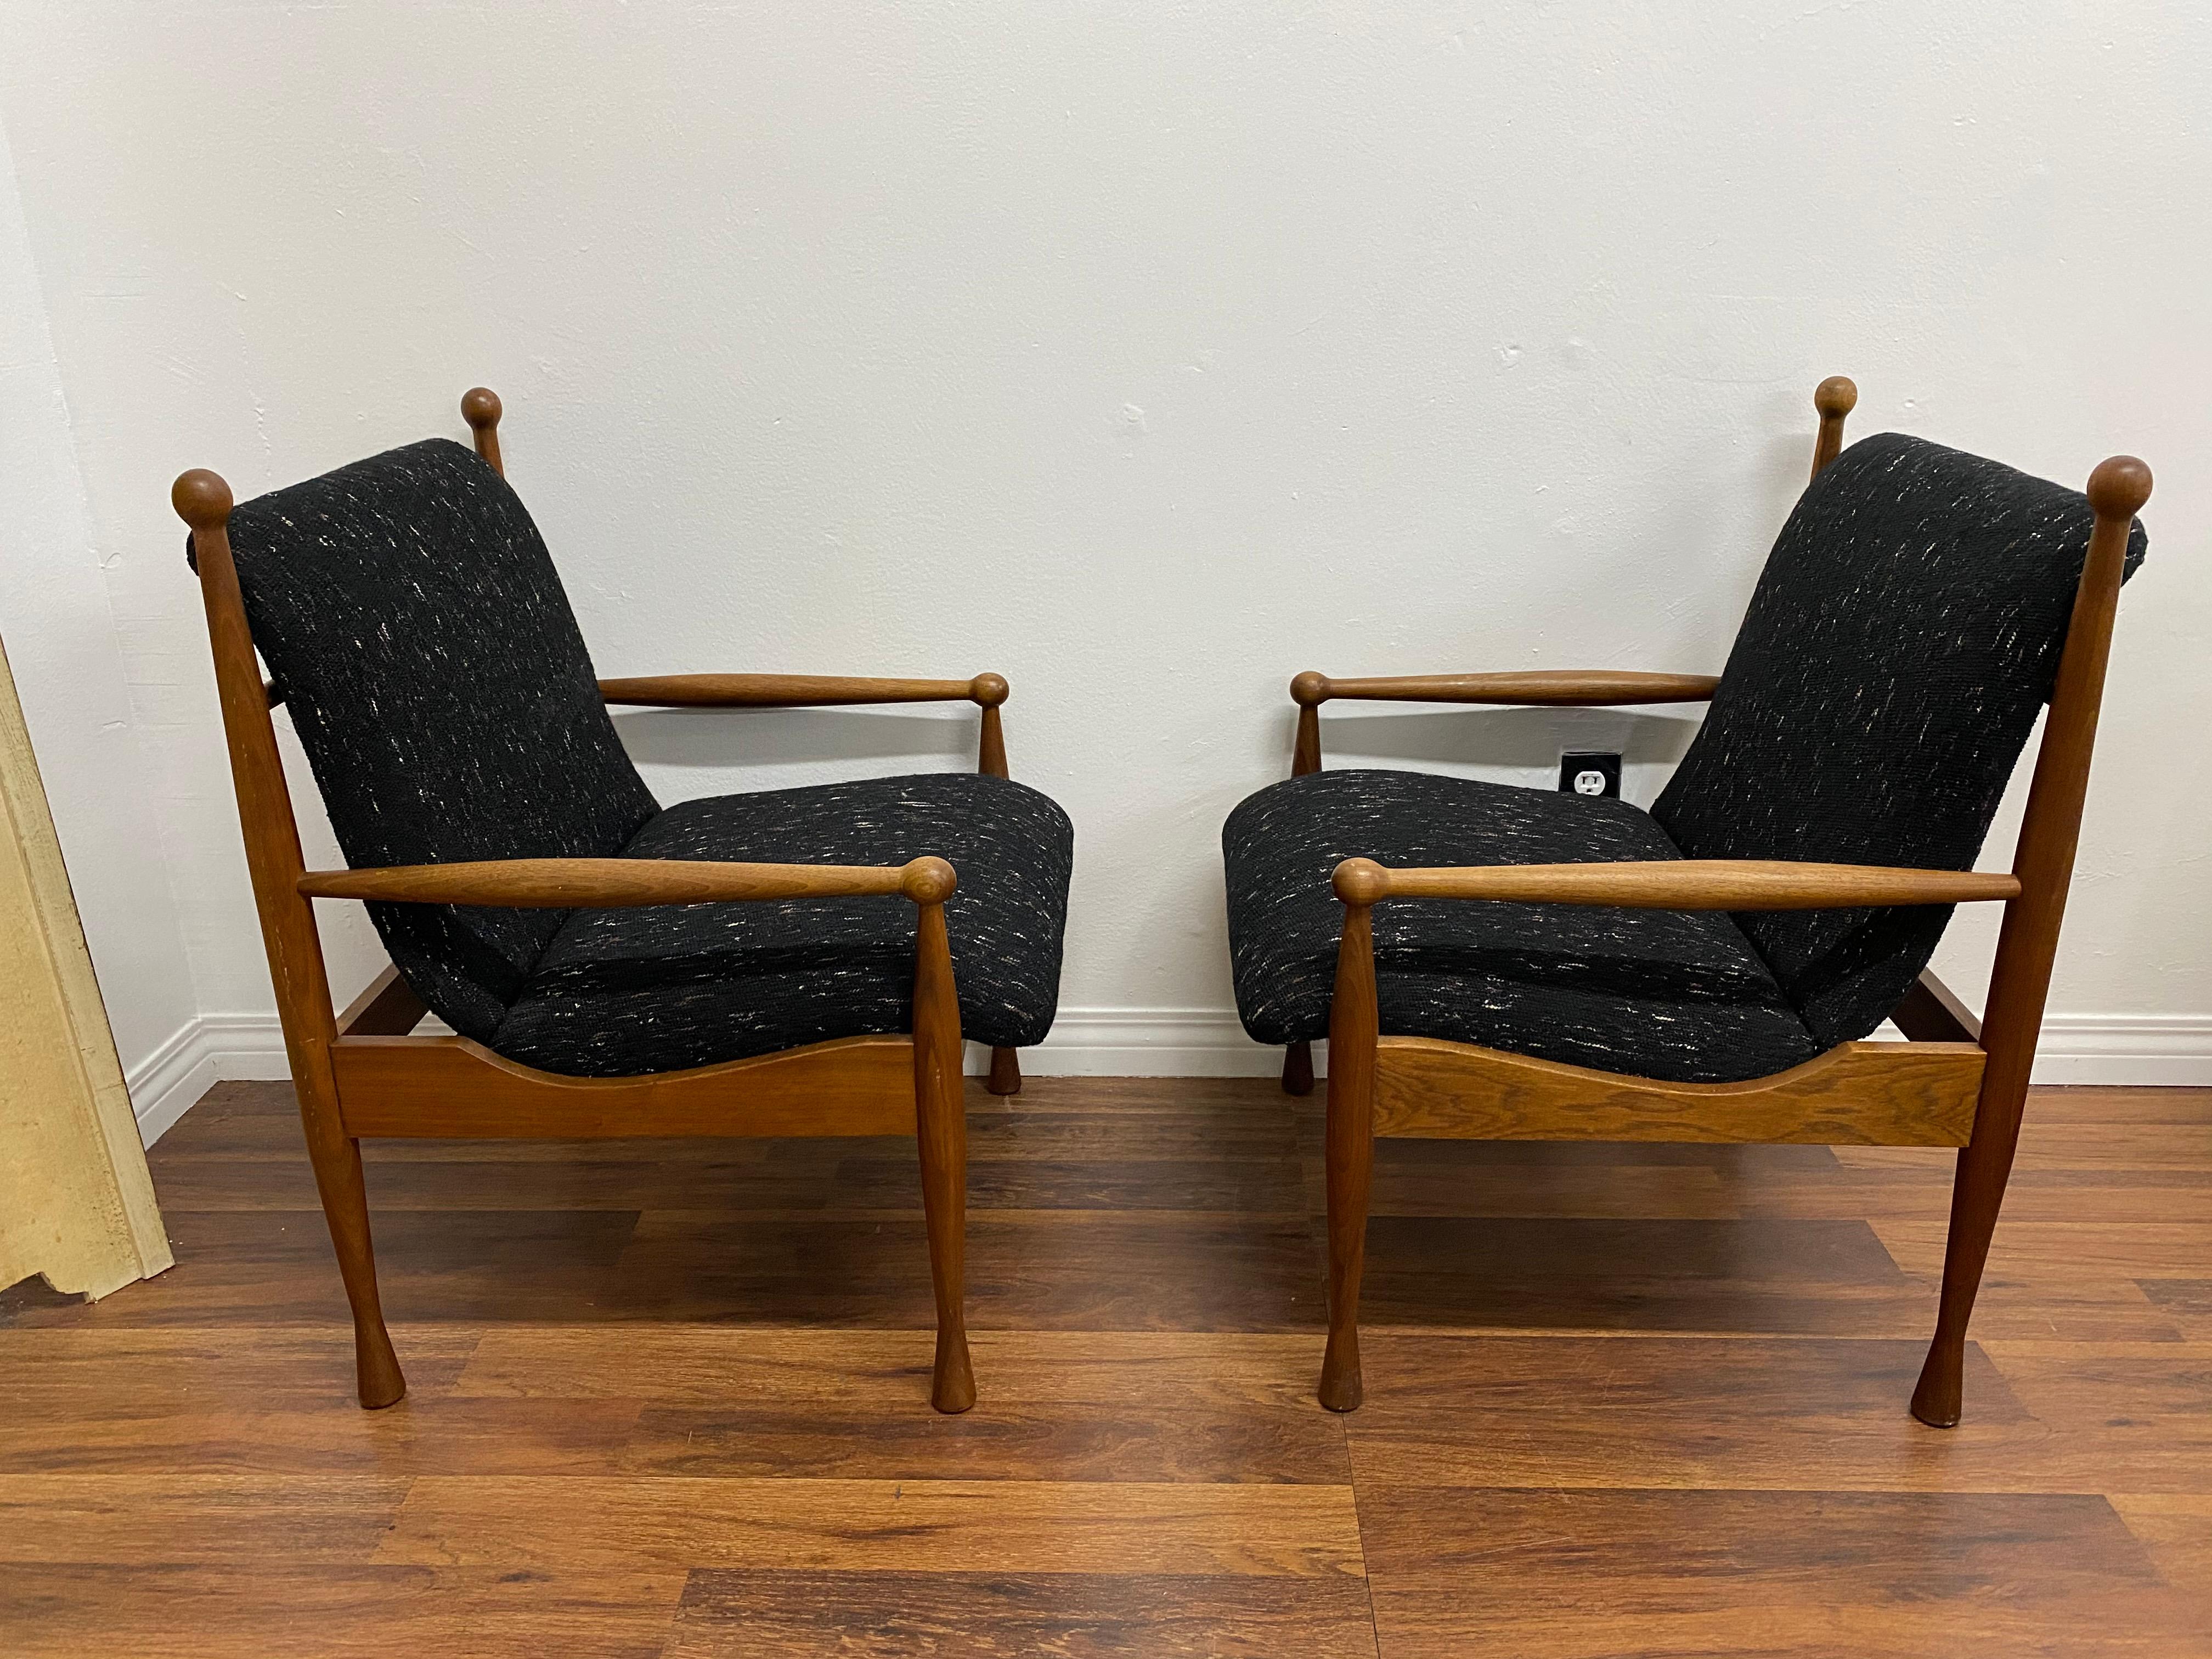 A pair of Danish teak armchairs, circa 1960s.Features a tweed upholstery. Great lines with excellent craftsmanship.